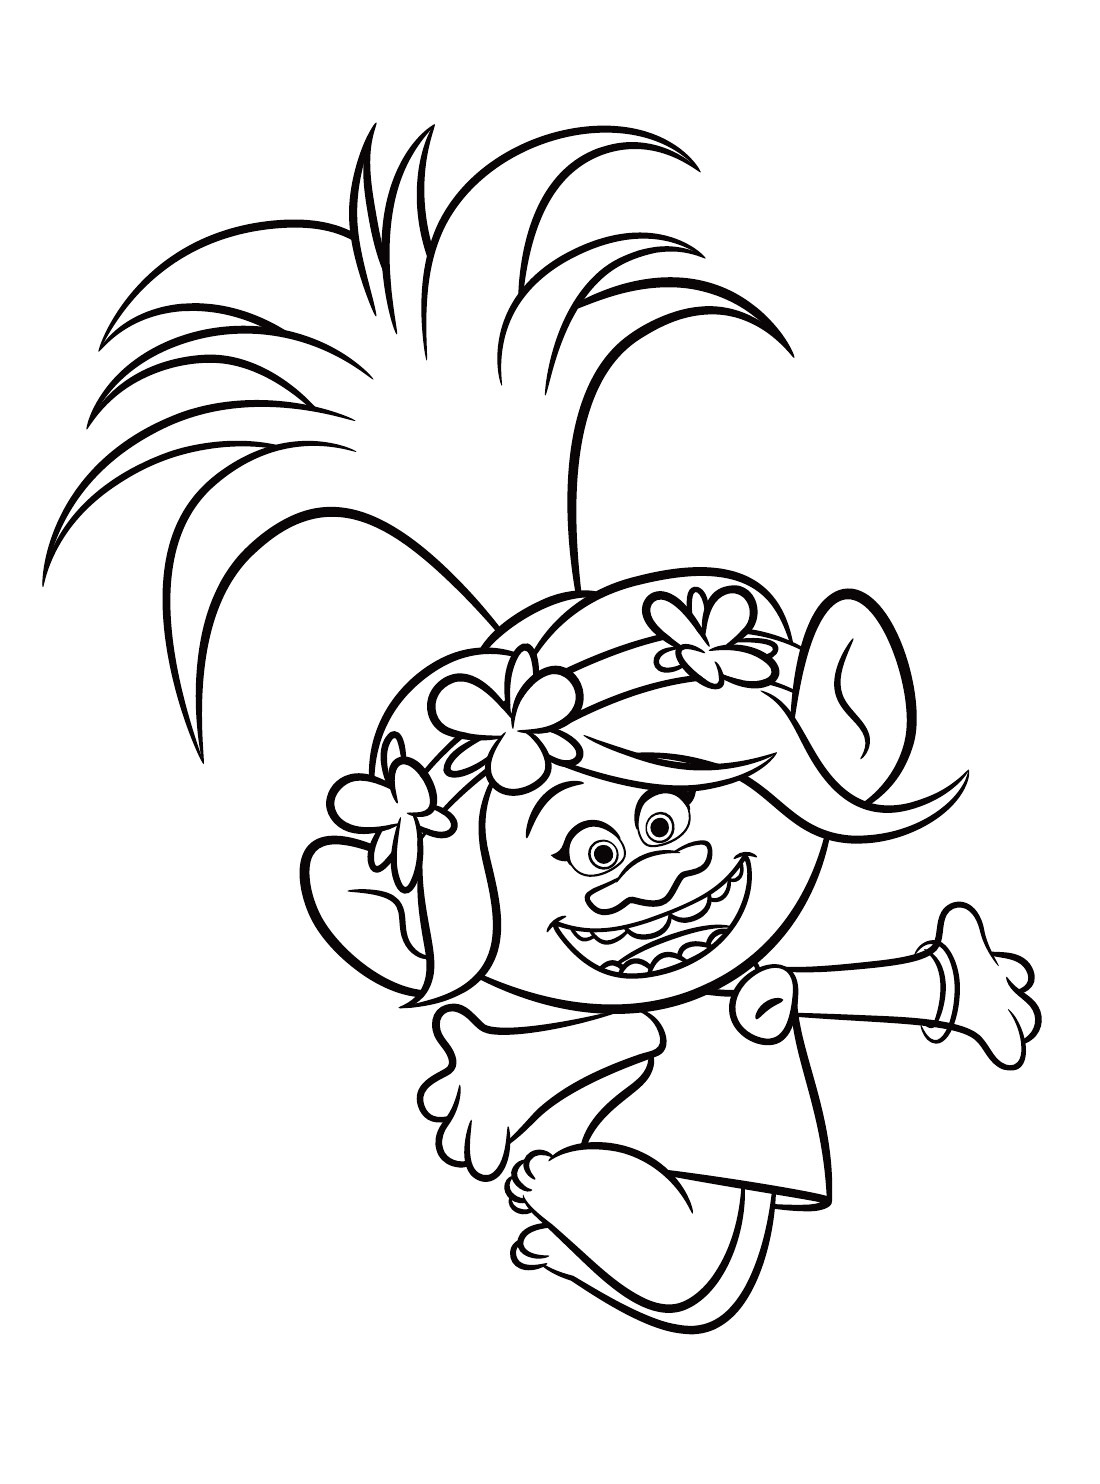 Trolls Movie Coloring Pages   Best Coloring Pages For Kids